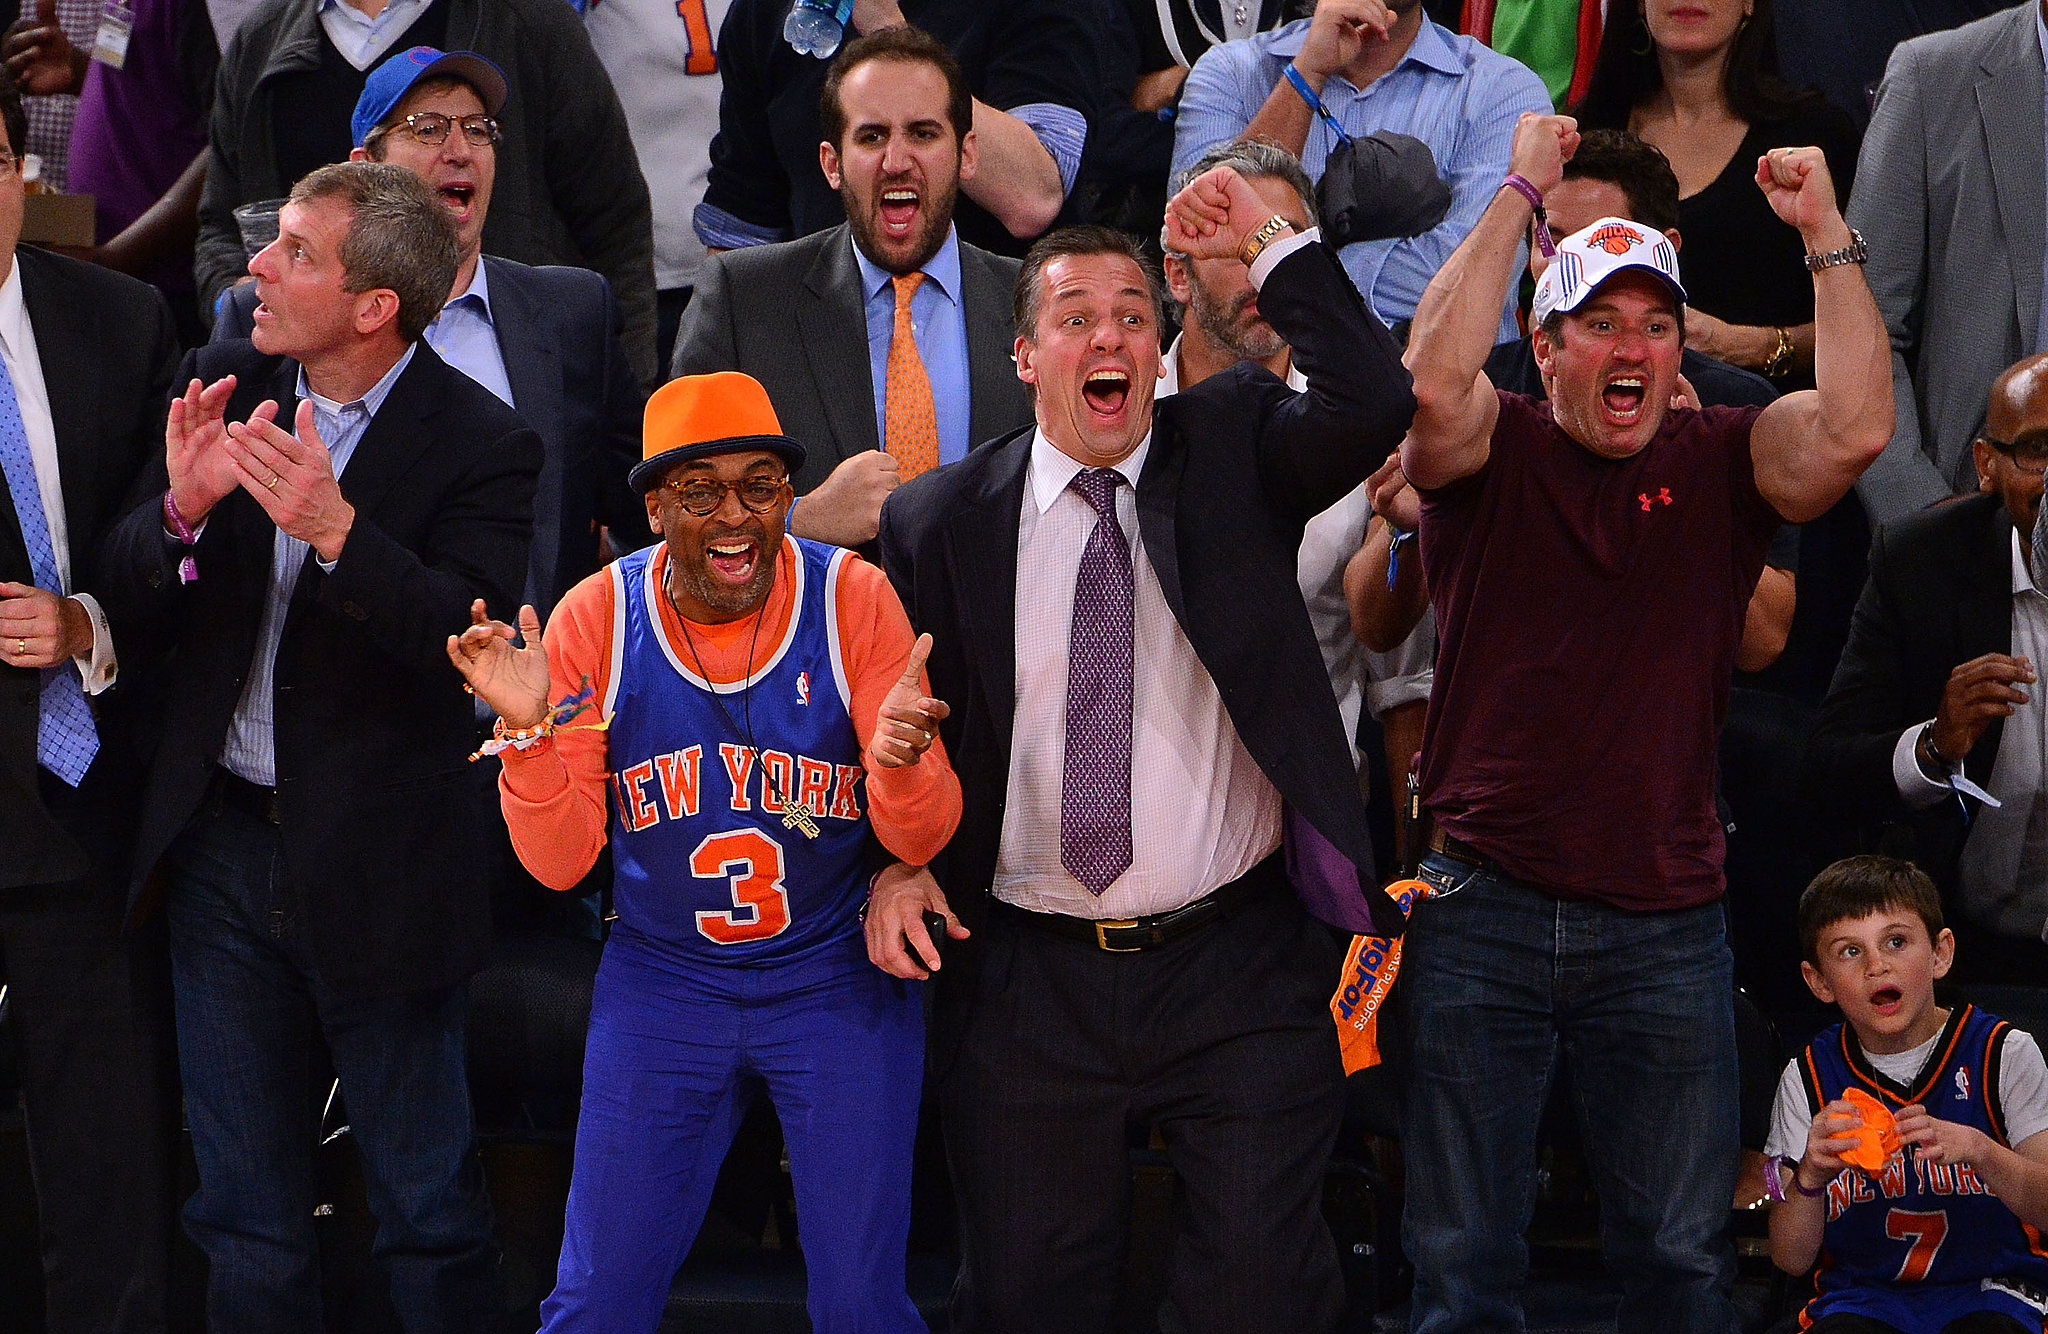 Spike Lee to Direct Documentary Series on 1990s NY Knicks